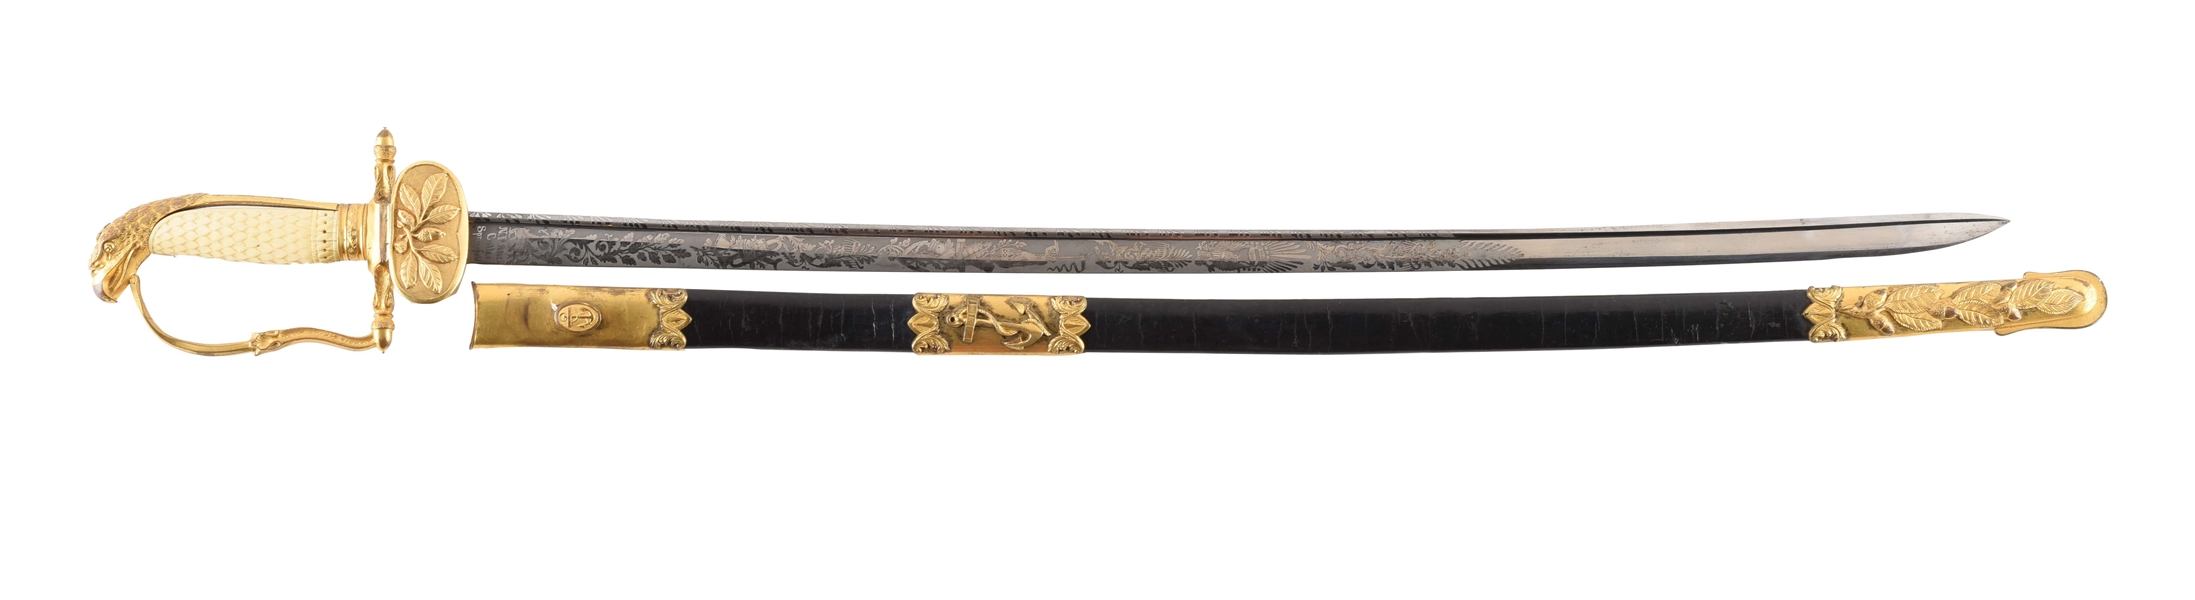 EXTREMELY RARE PRESENTATION GRADE AMES MODEL 1841 NAVY OFFICERS SWORD.